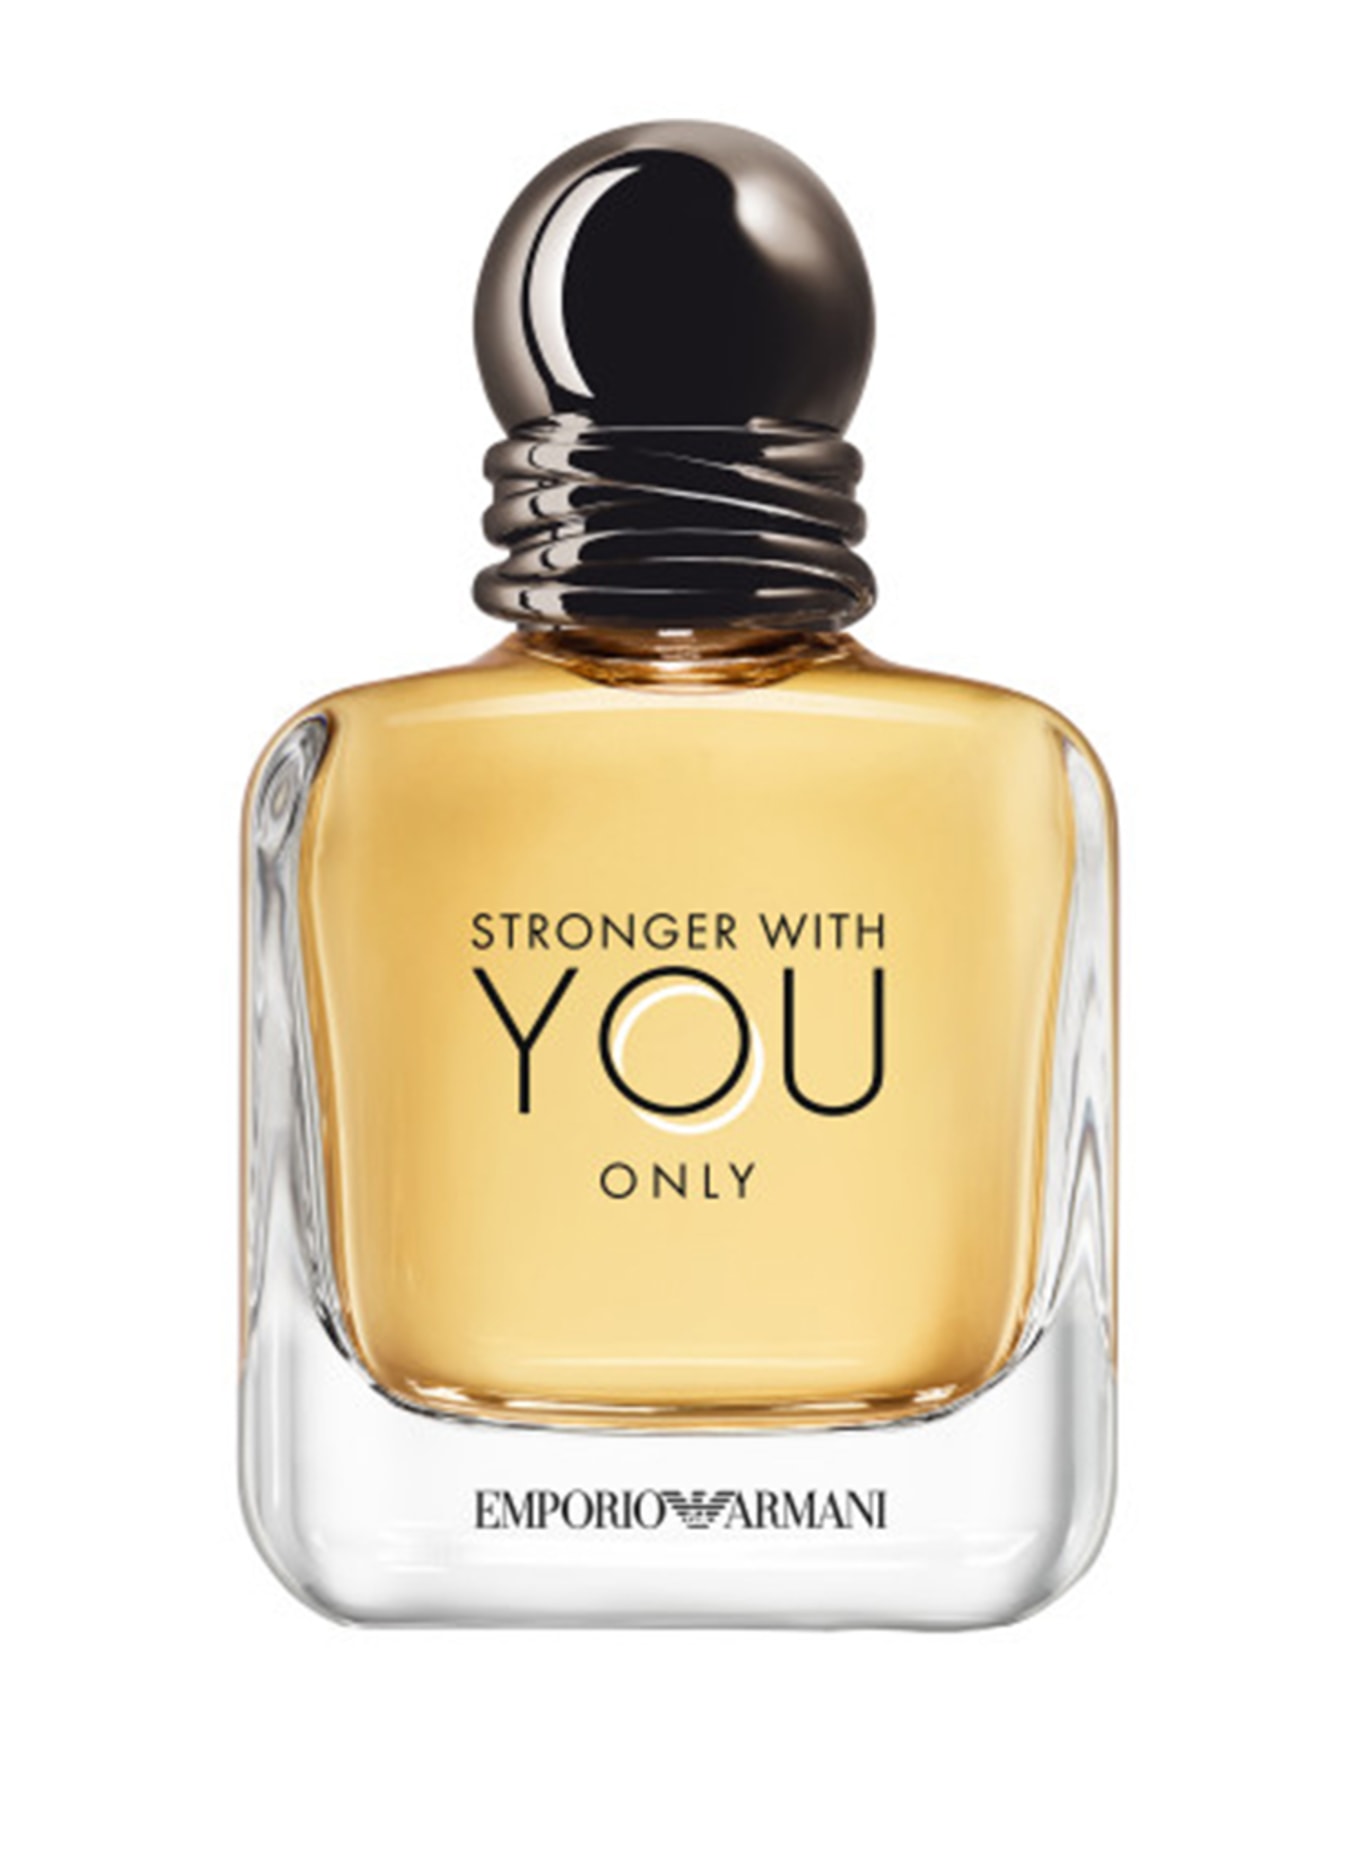 EMPORIO ARMANI STRONGER WITH YOU ONLY (Obrazek 1)